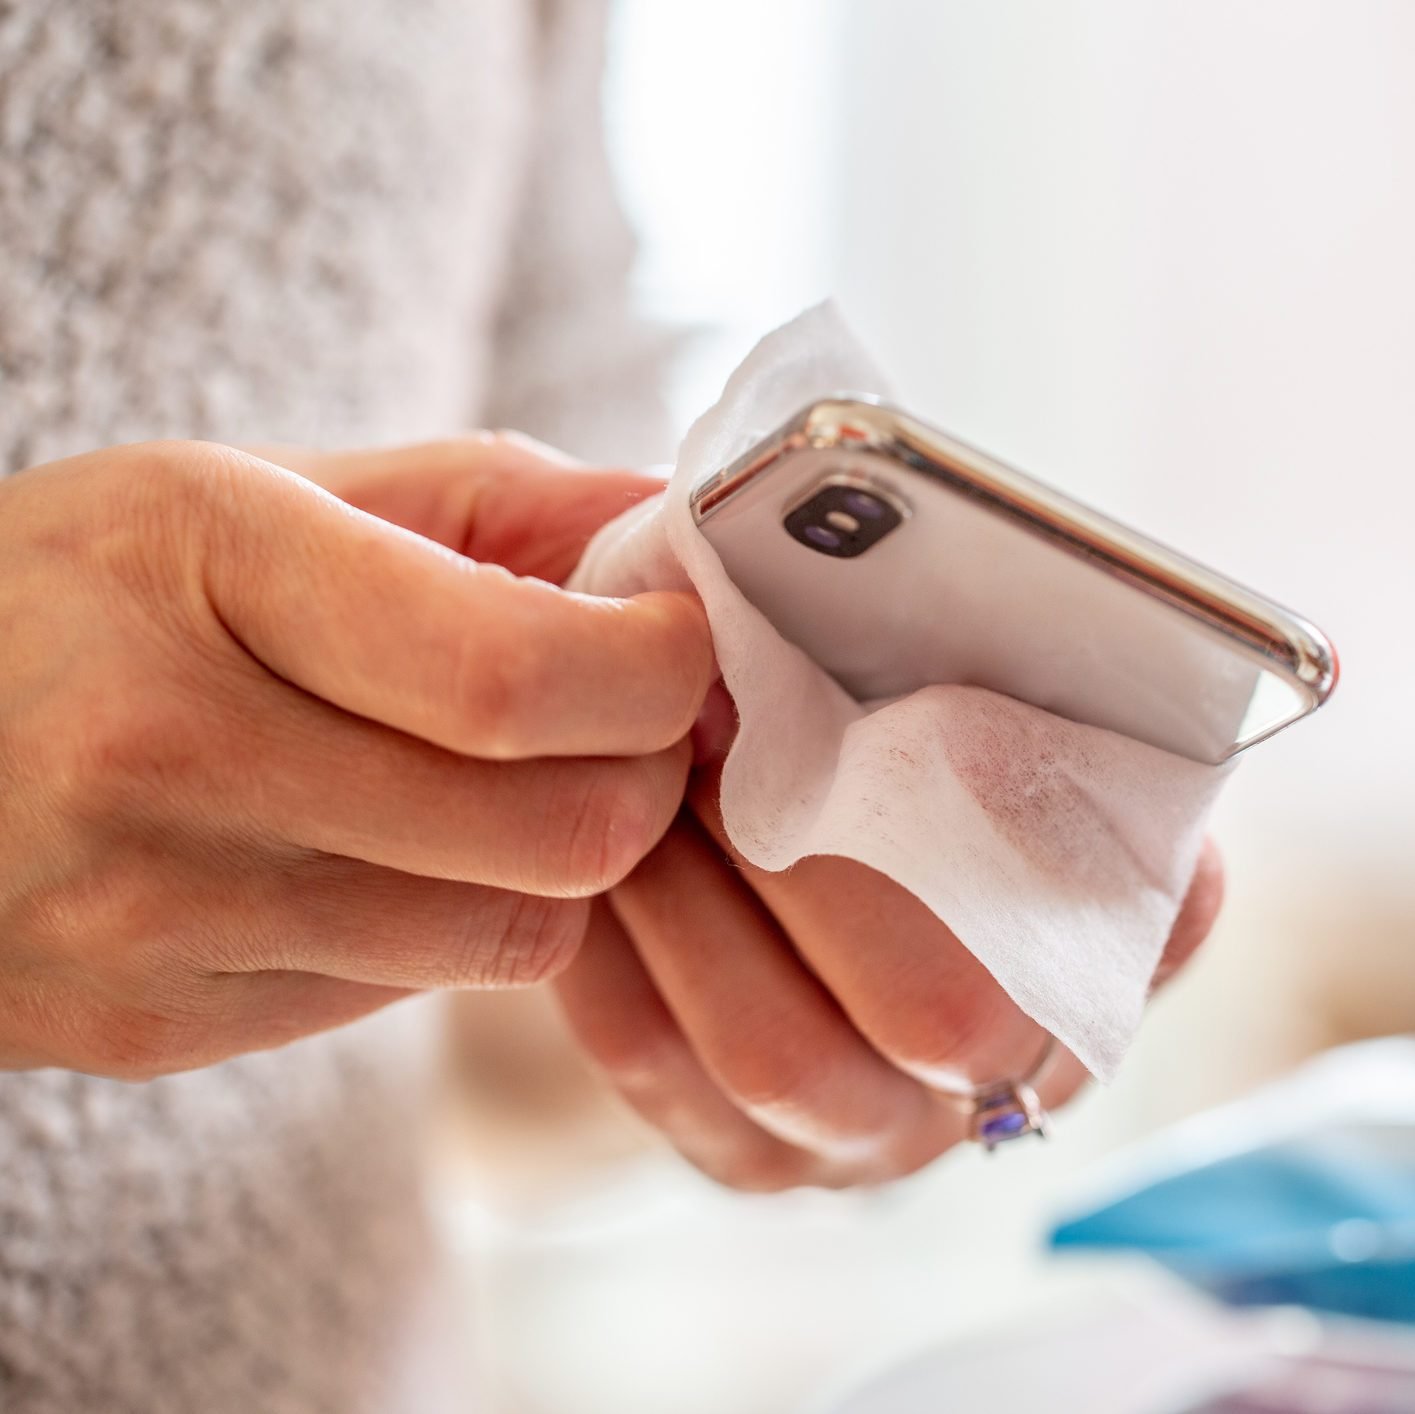 Here's the Right Way to Disinfect Your Phone to Kill Coronavirus